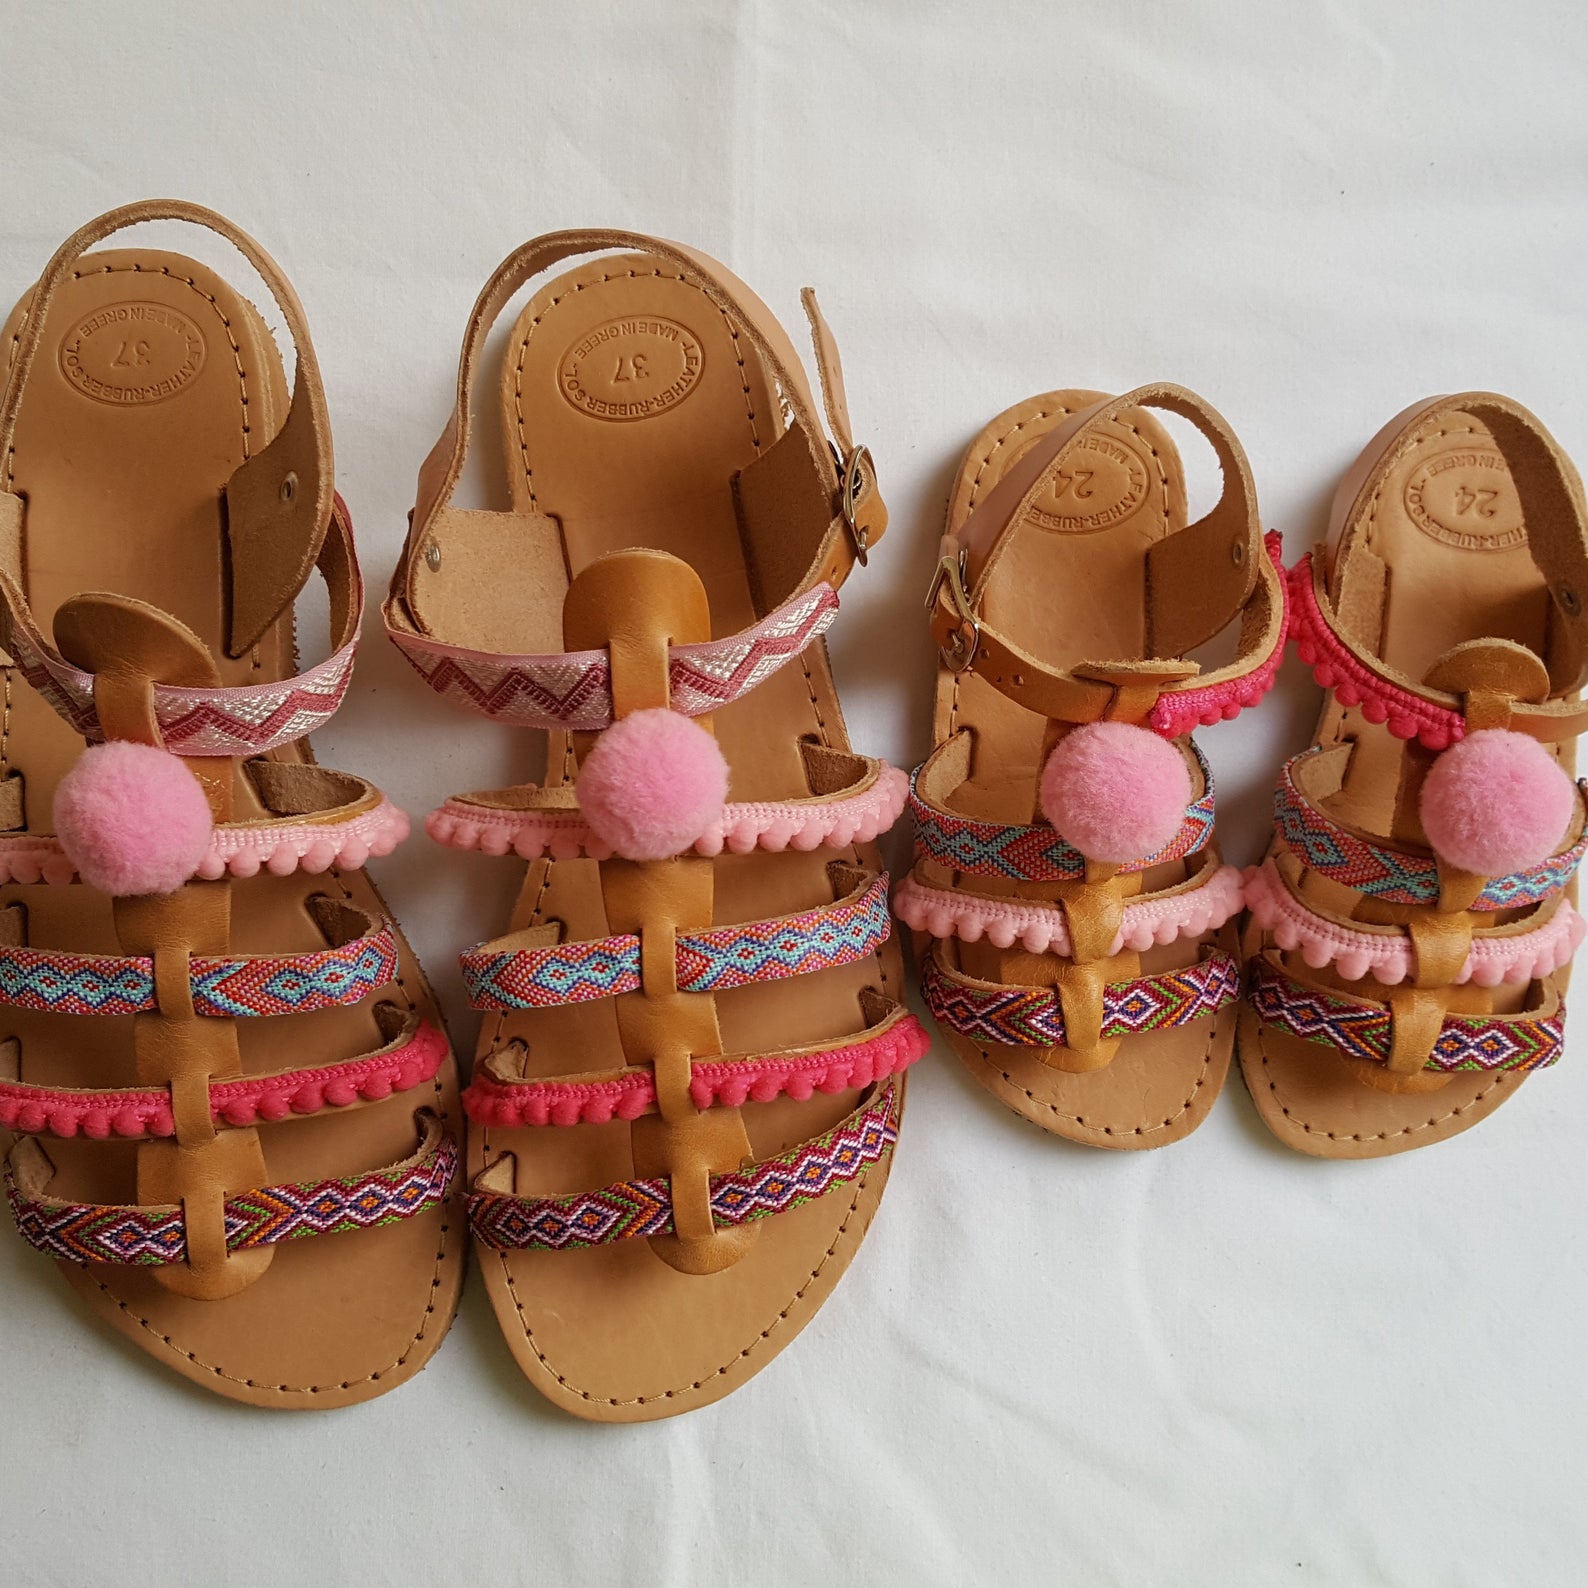 Mommy and me sandals